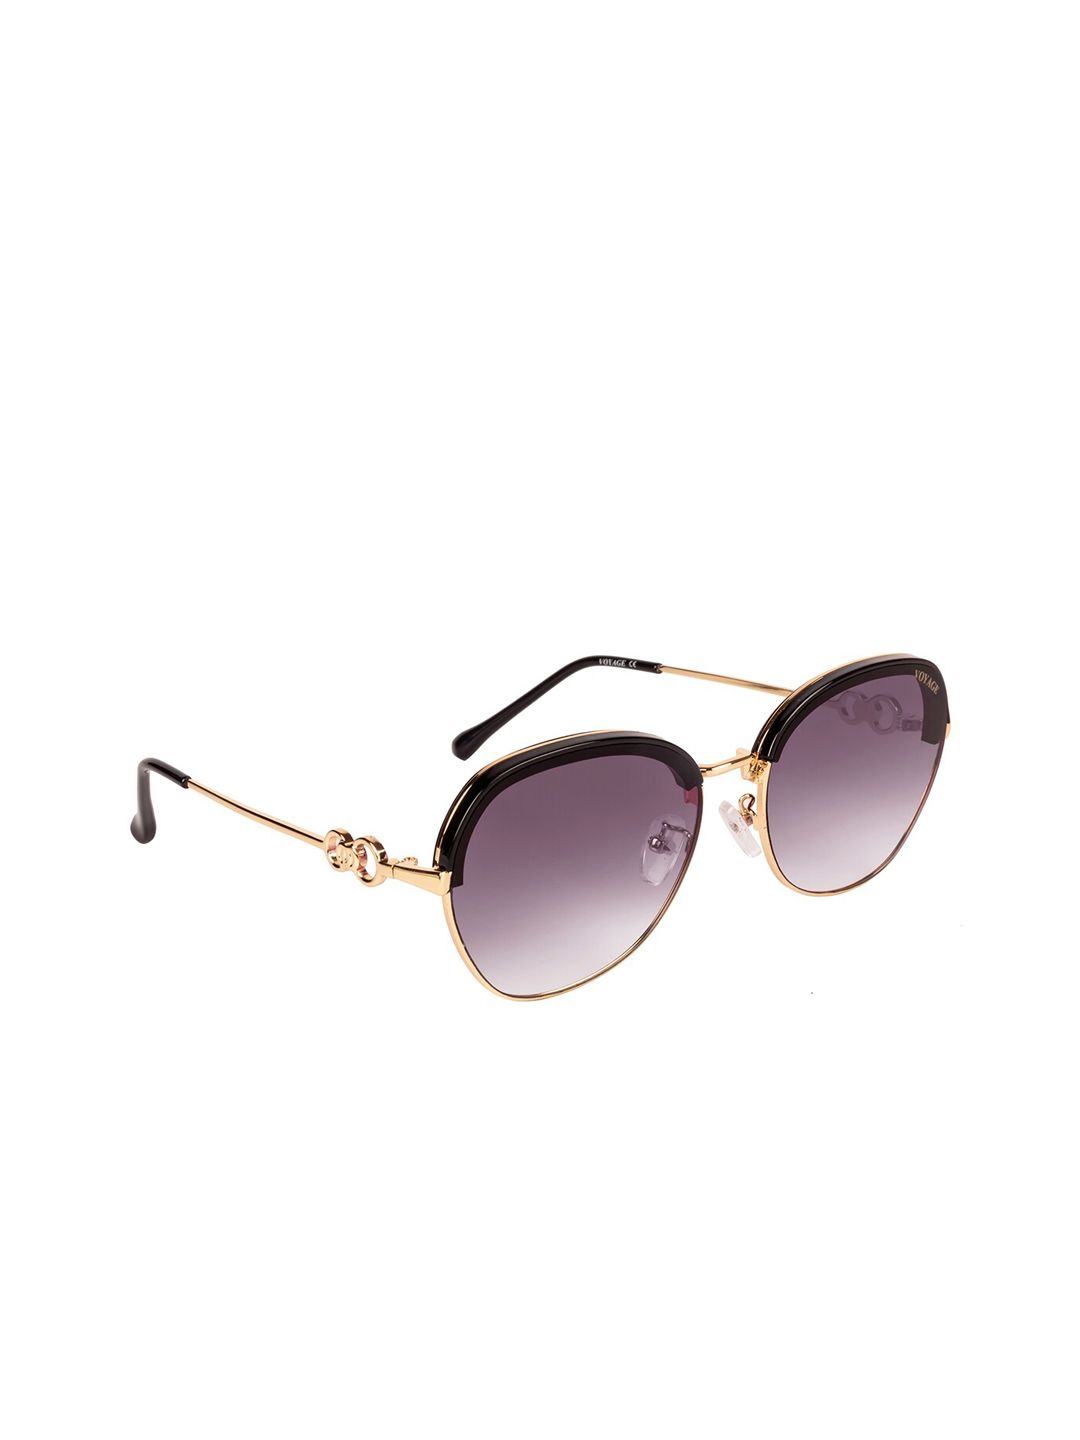 Voyage Unisex Oval Sunglasses B80403MG3482 Price in India